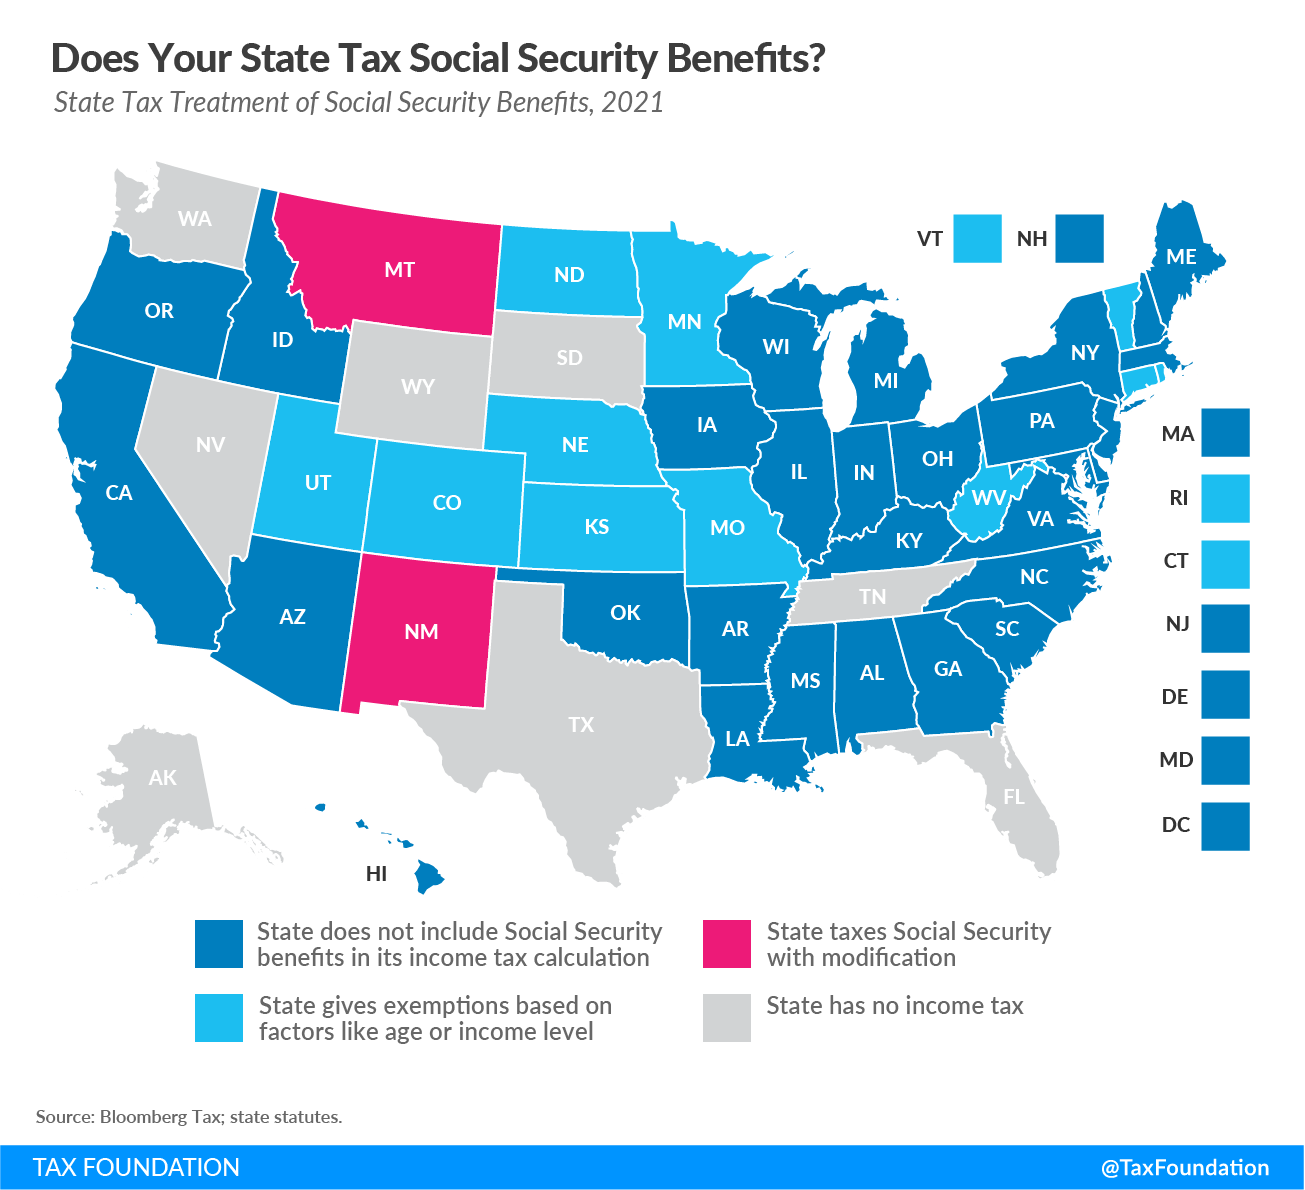 How Does Your State Treat Social Security Income Does Your State Tax Social Security Benefits Compare States that tax Social Security benefits